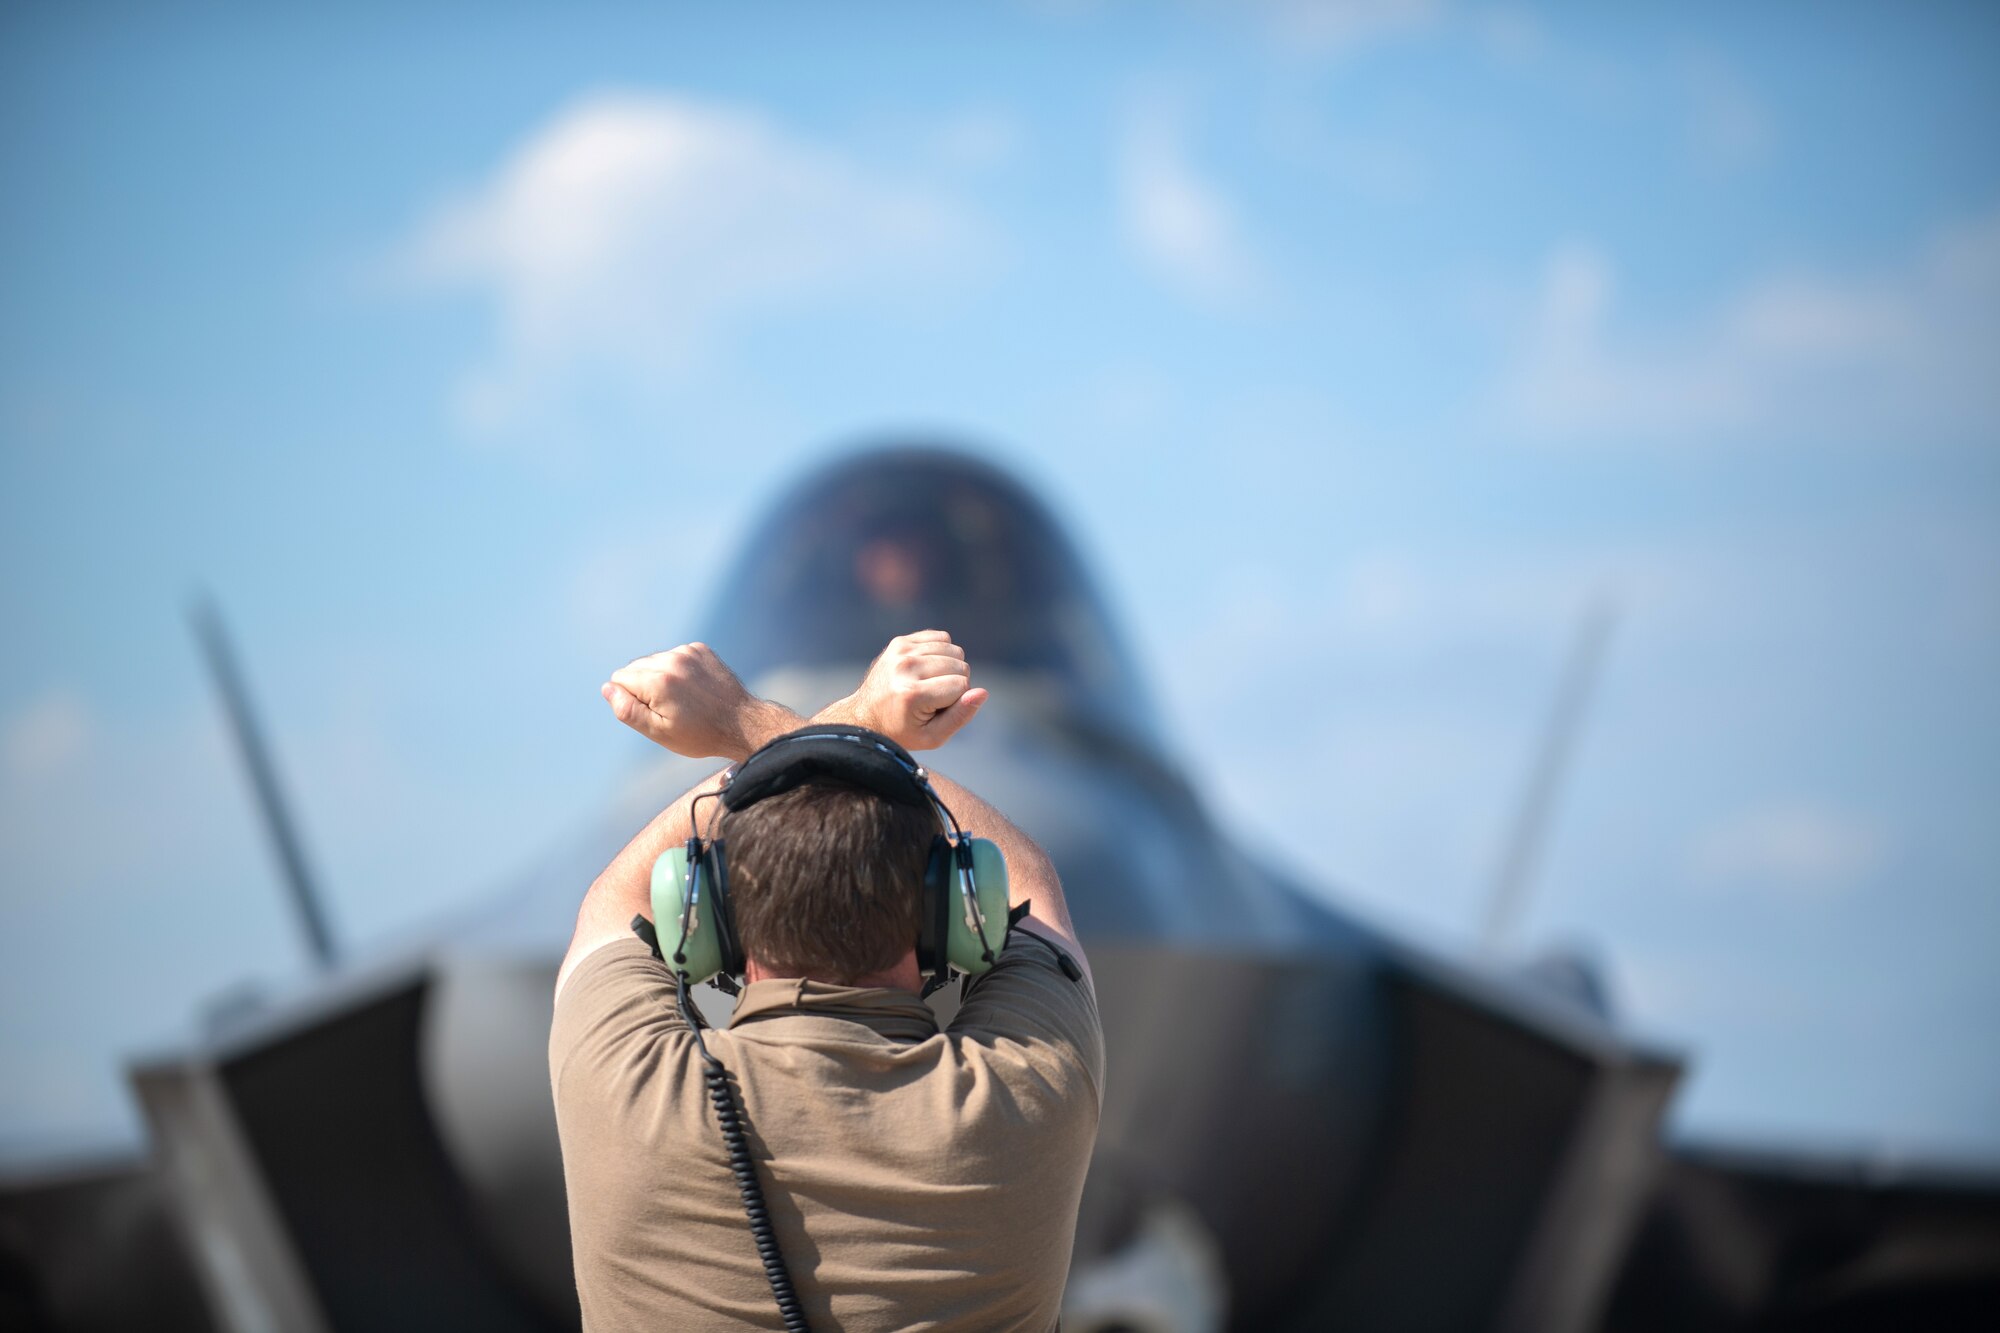 A crew chief assigned to the 158th Maintenance Group, Vermont Air National Guard, marshals an F-35A Lightning II at Northern Lightning, a training exercise held annually at Volk Field, Wisc., Aug. 13, 2020. Lt. Col. John “Rocky” MacRae, assigned to the 134th Fighter Squadron, Vermont Air National Guard, was piloting this Tail 5279, which achieved the thousandth sortie milestone for the Green Mountain Boys. (U.S. Air National Guard photo by Ms. Julie M. Shea)